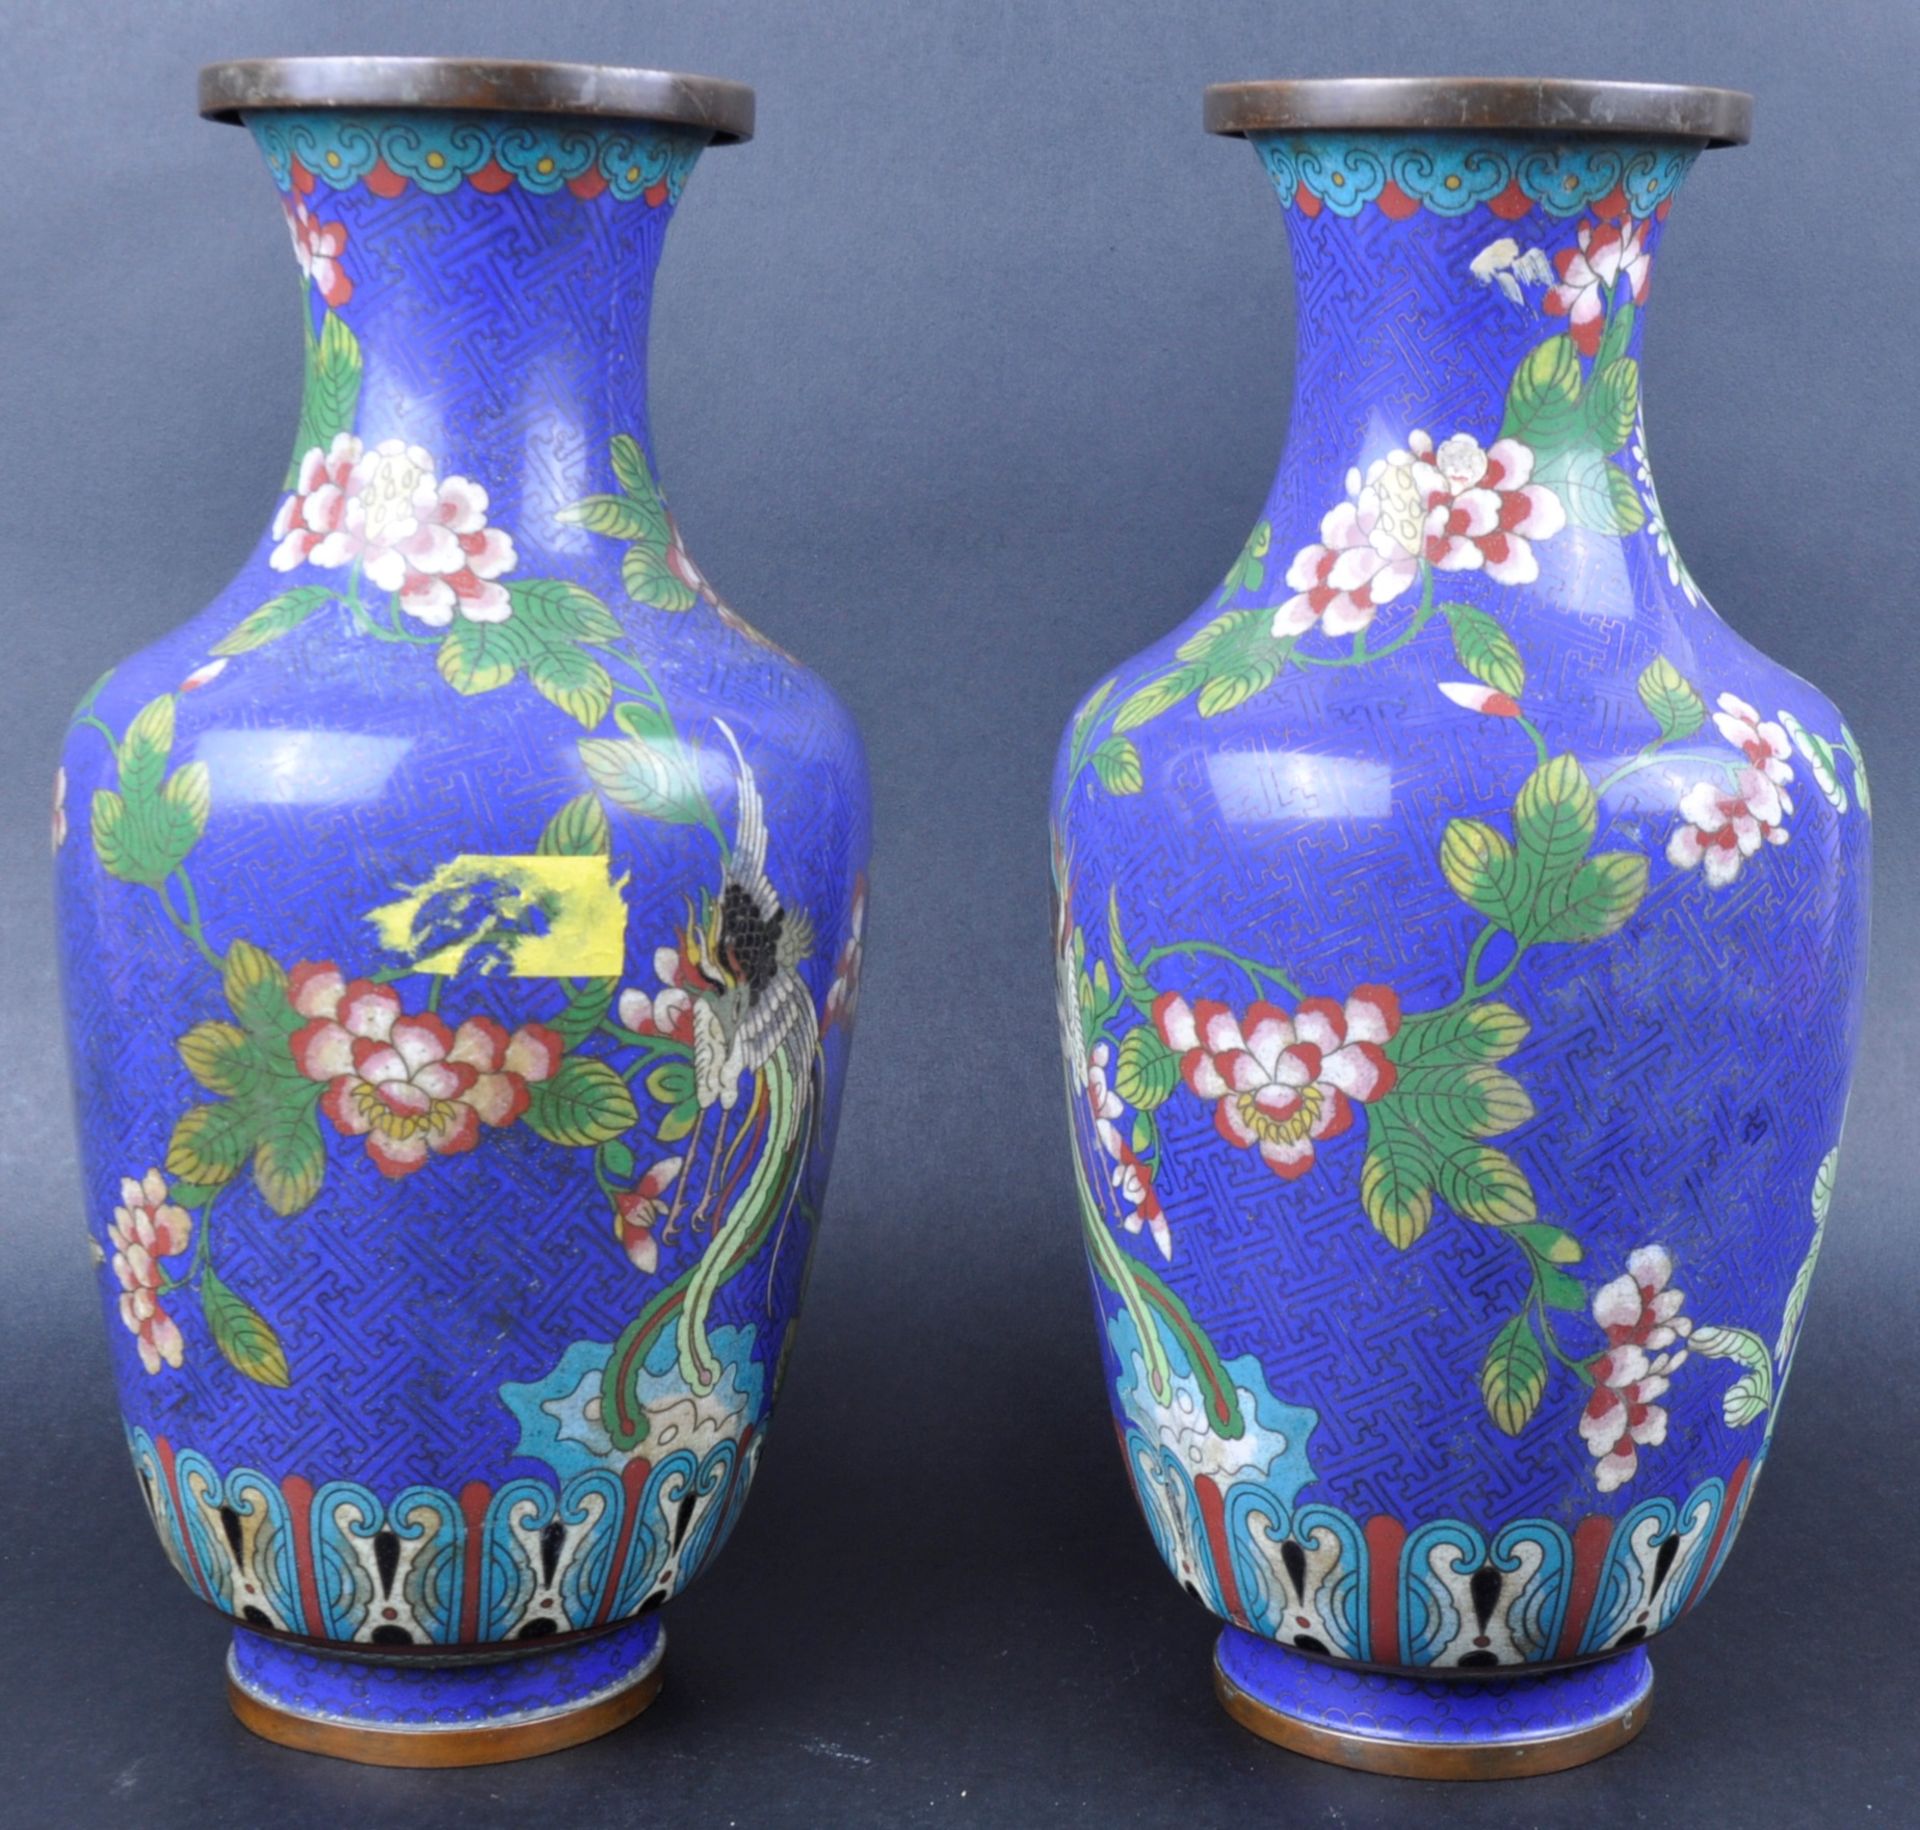 PAIR OF CHINESE CLOISONNE VASES